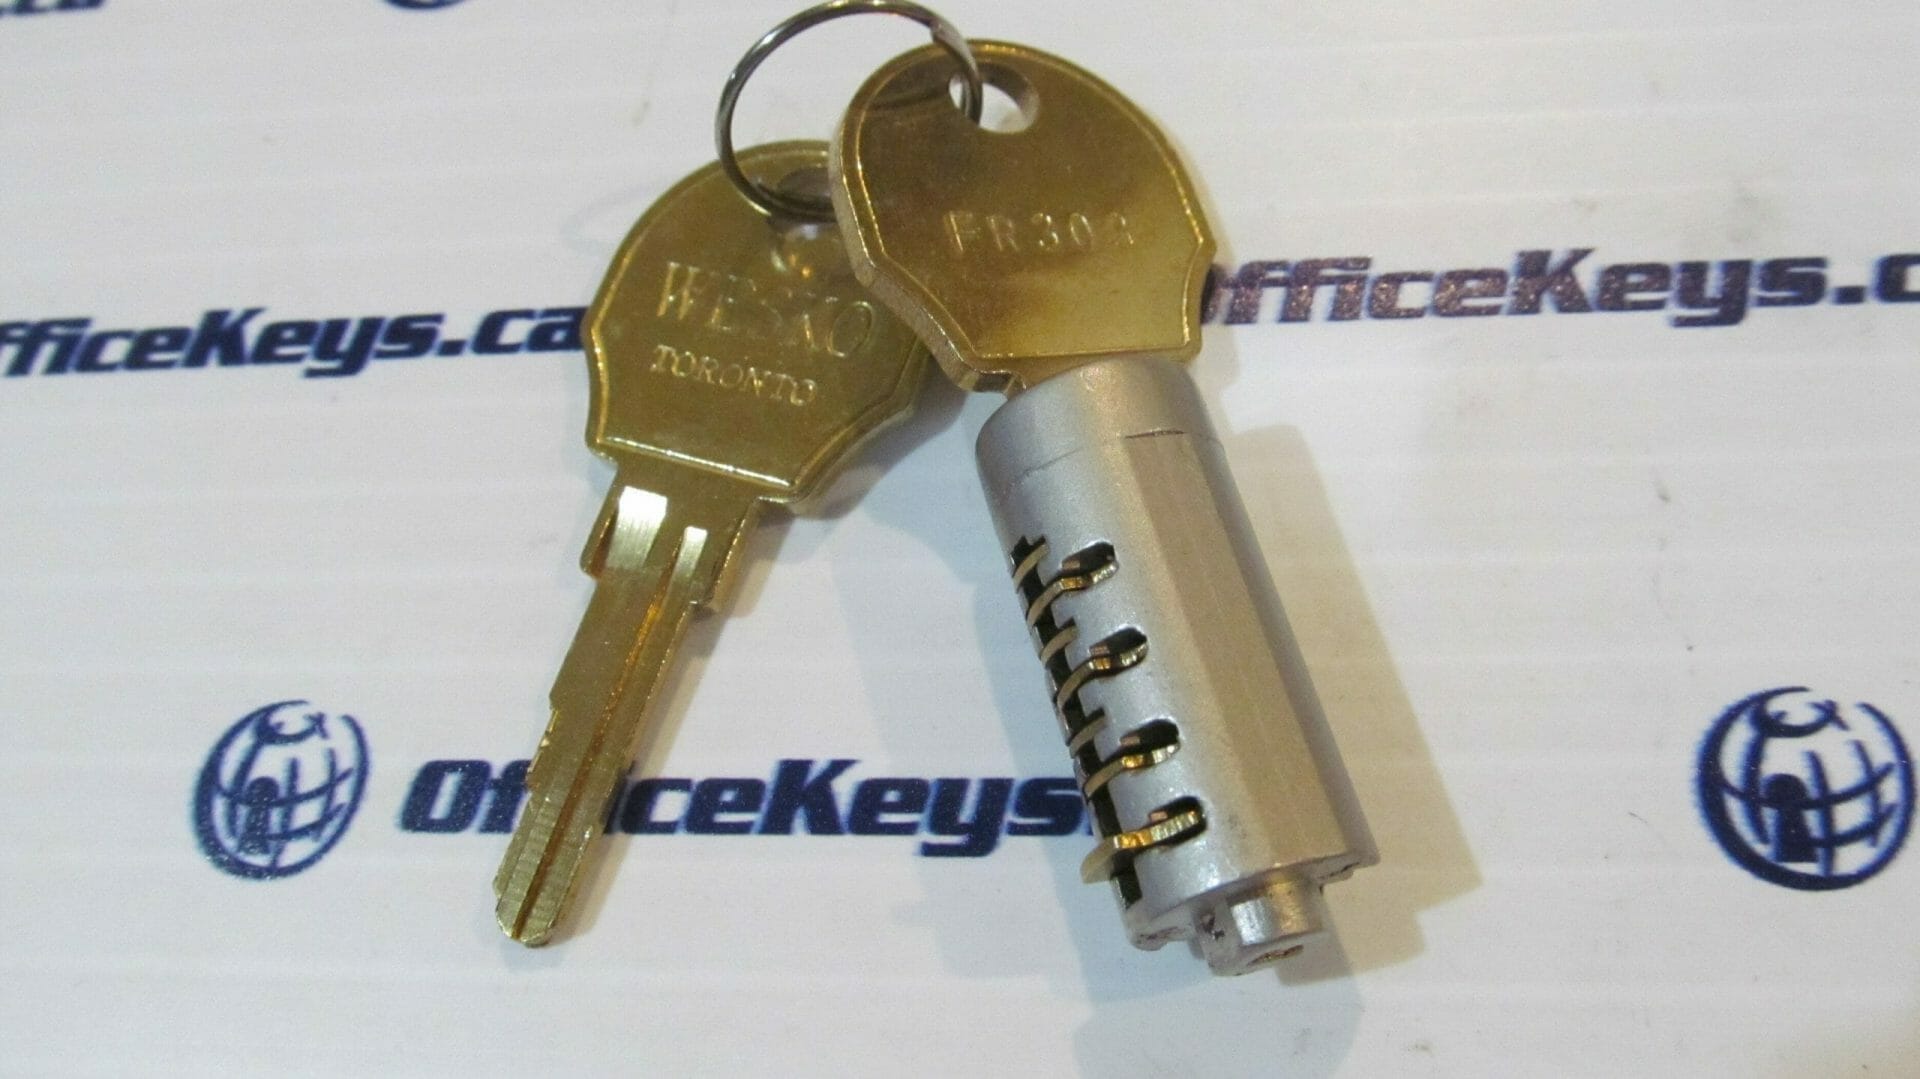 FREE CHANGE KEY/ FREE SHIPPING!!!!!!! Steelcase lock cores/New and Used 